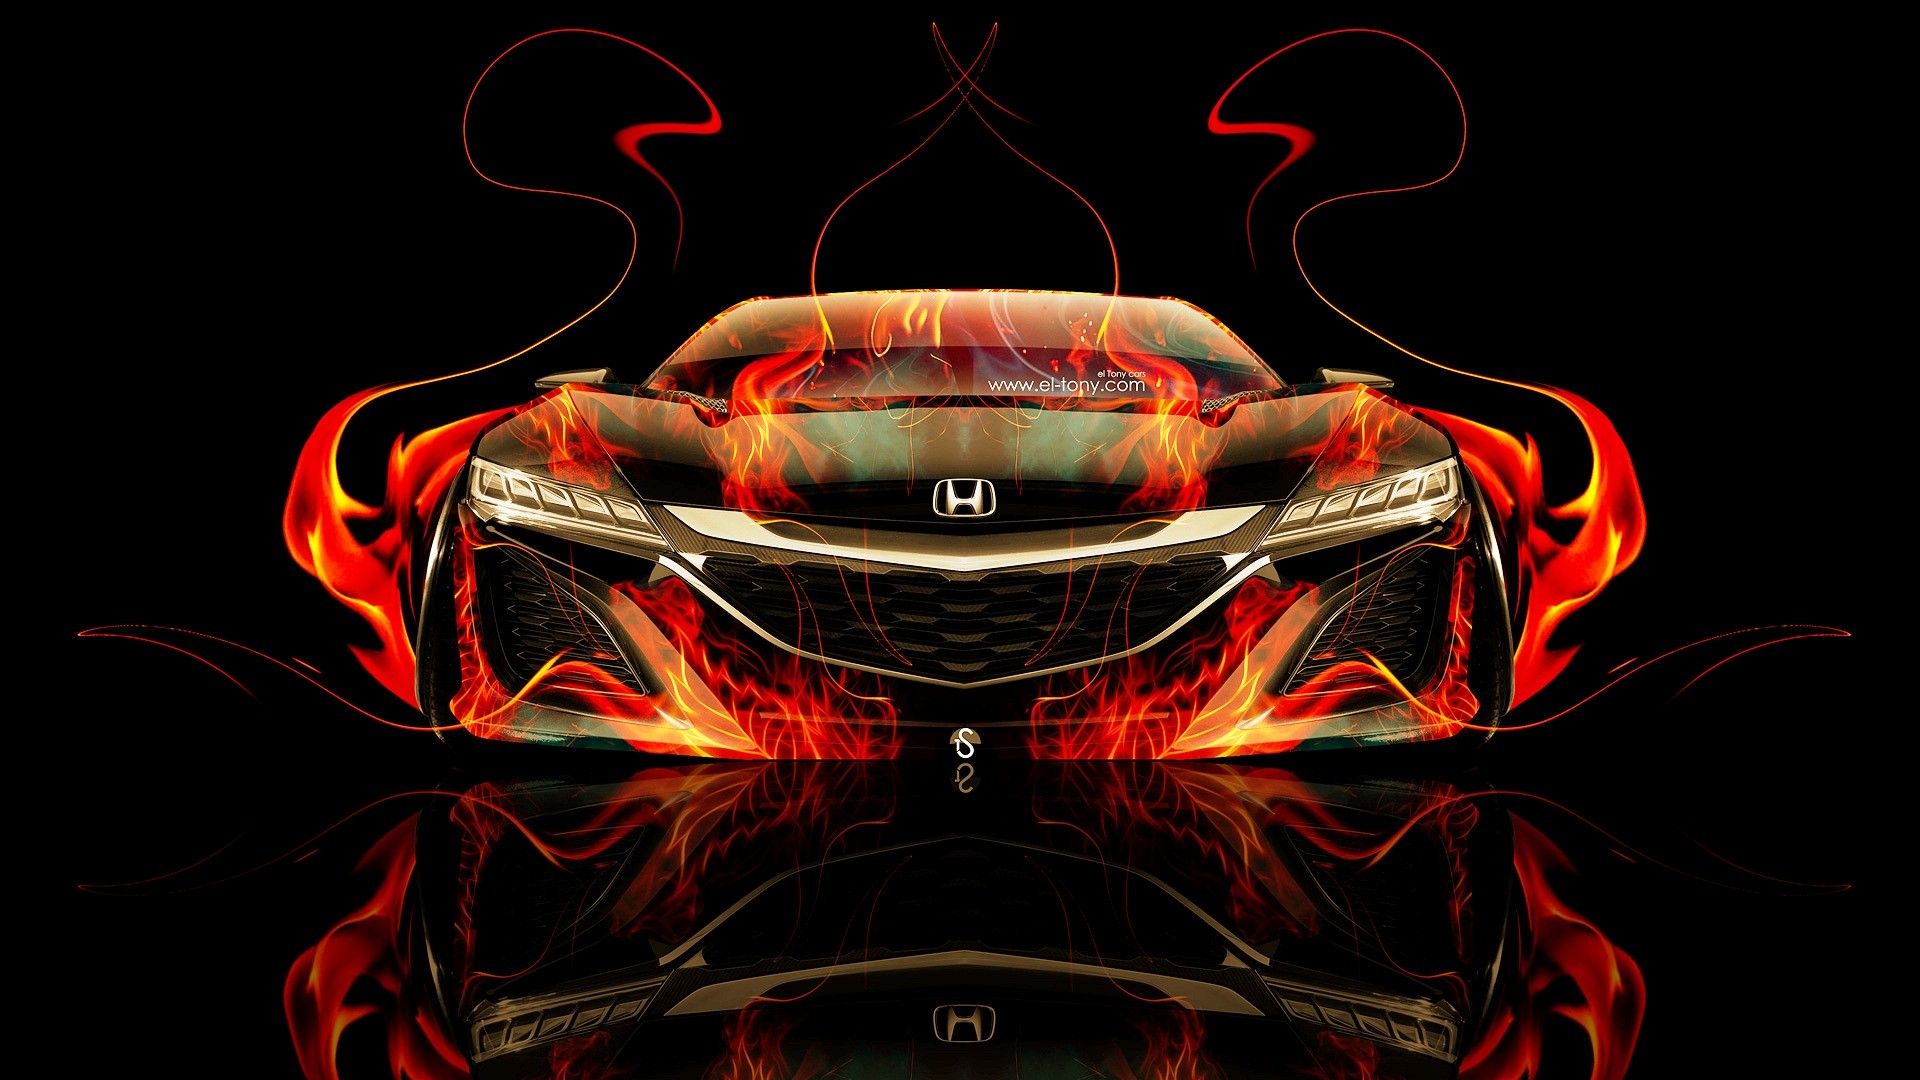 Design Talent Showcase Tony.com Brings Sensual Elements Fire And Water To YOUR Car Wallpaper 11